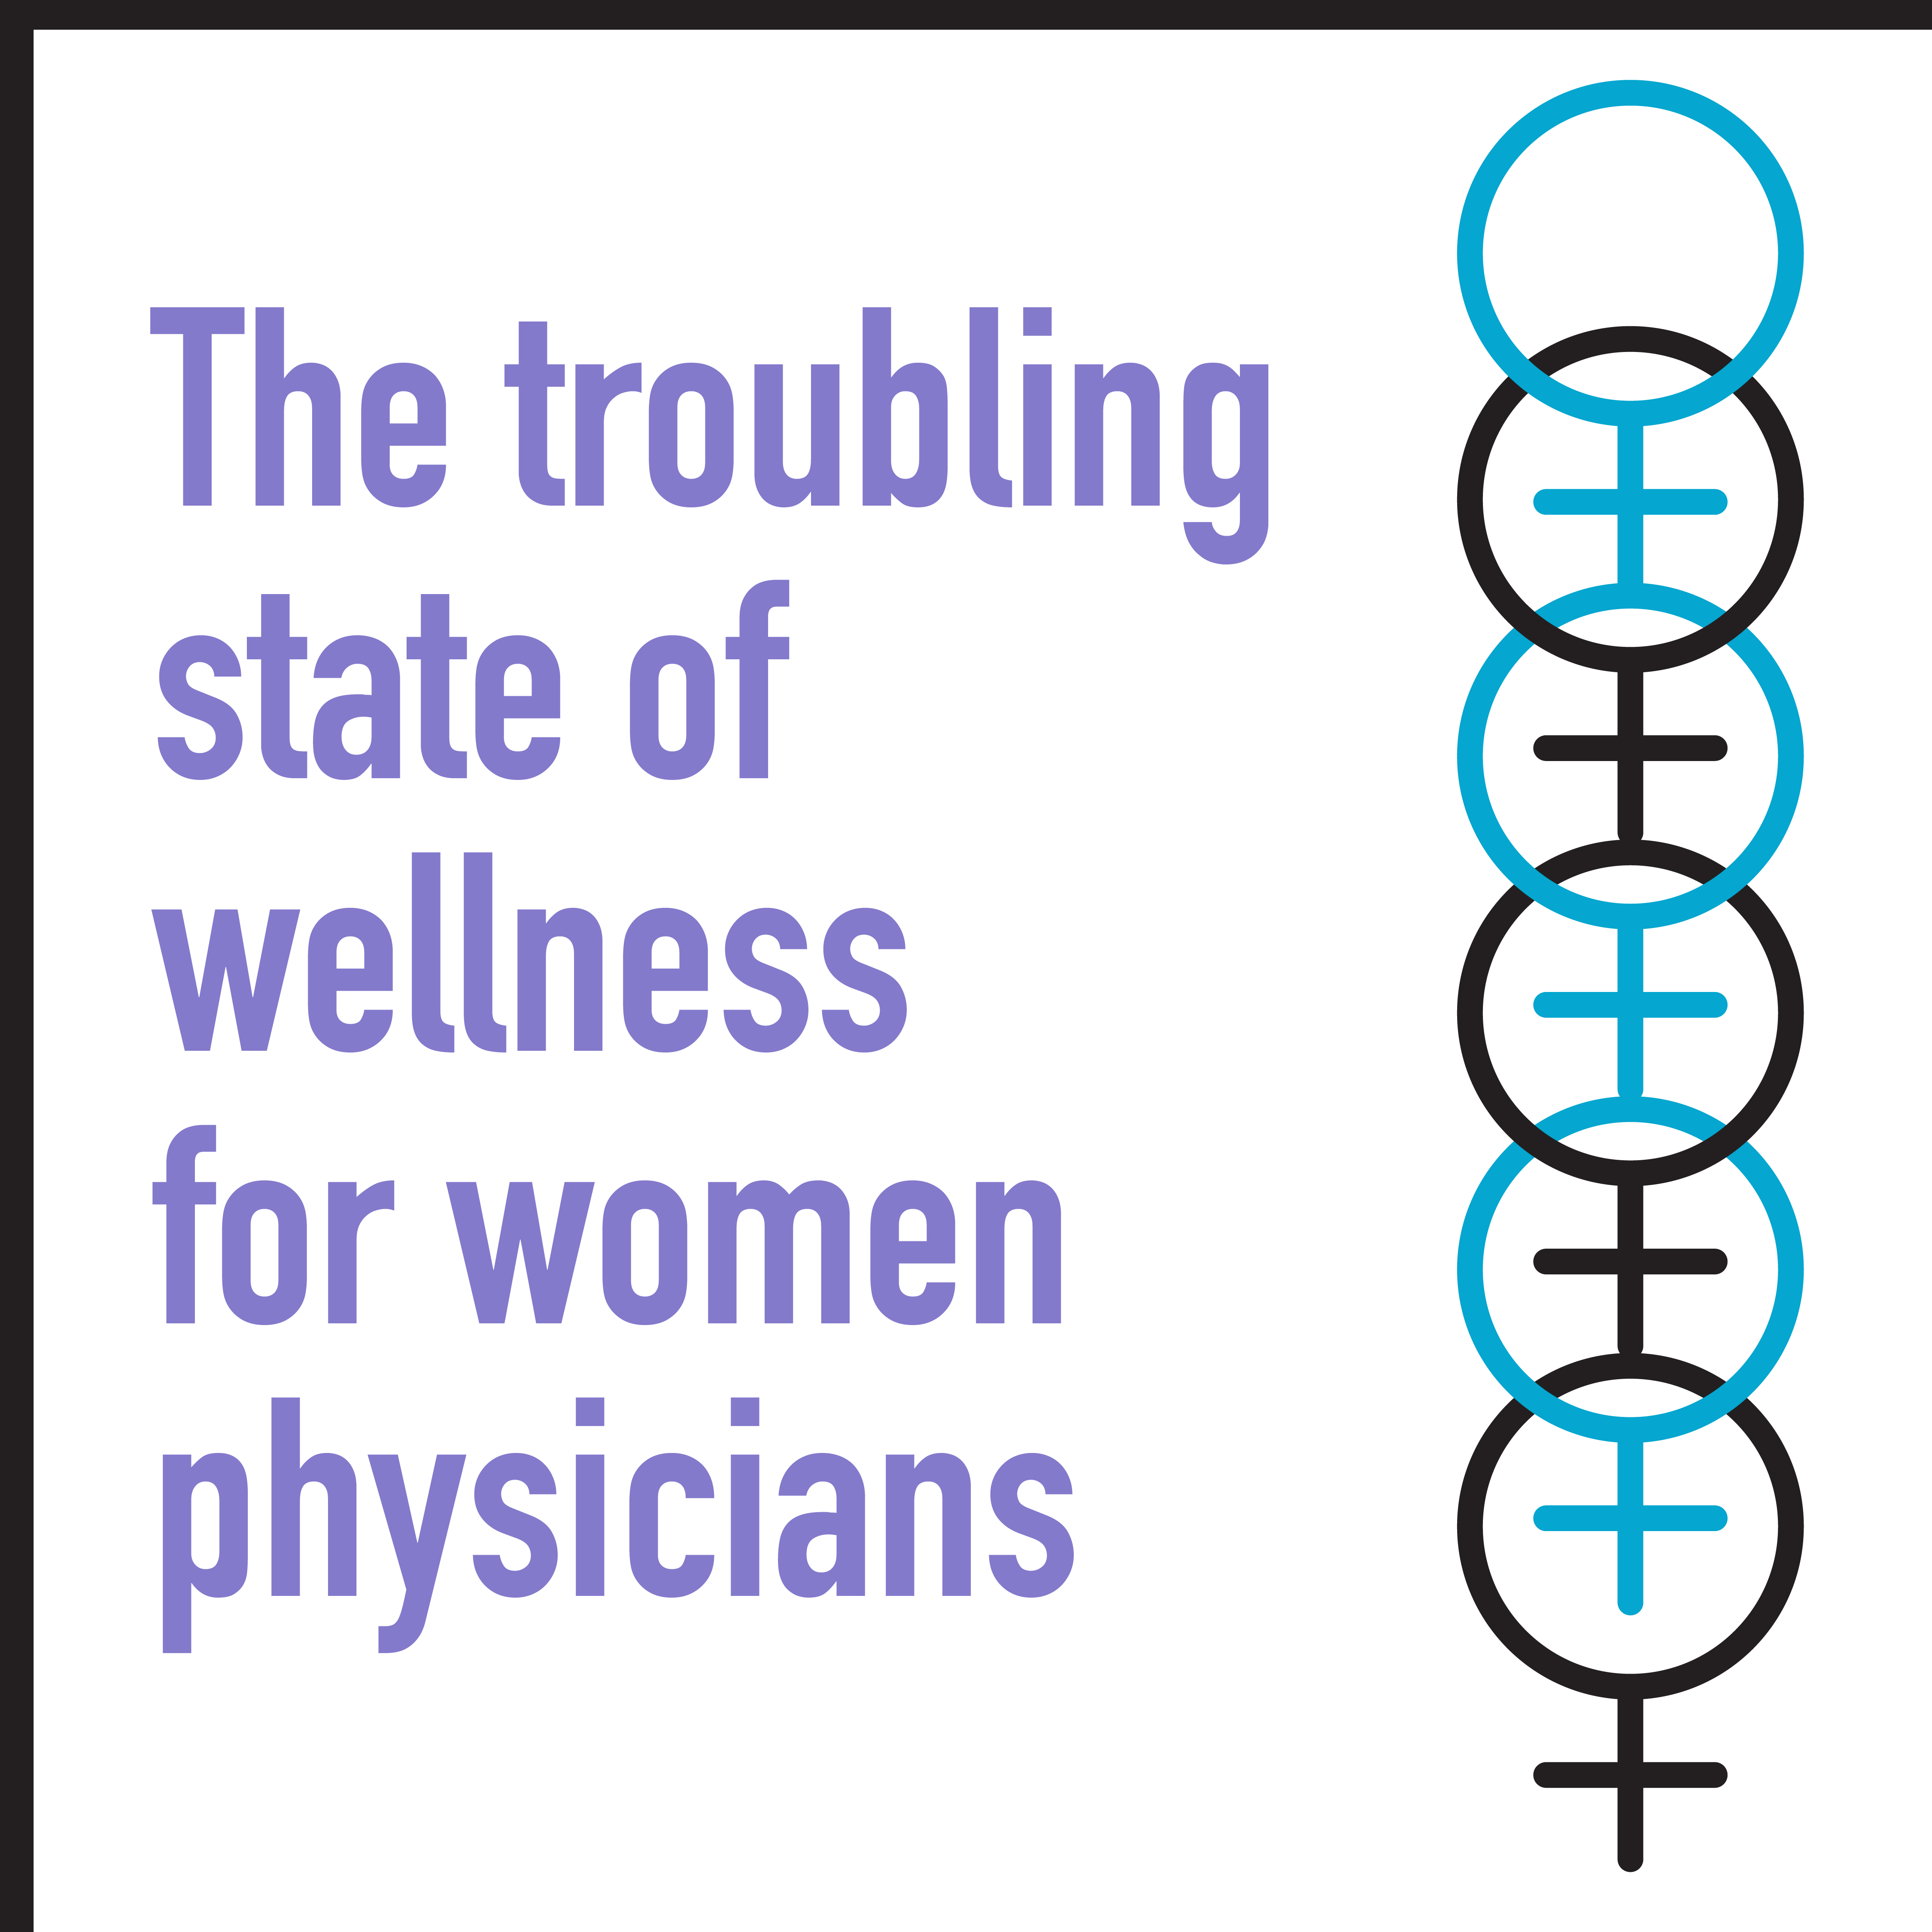 The troubling state of wellness for women physicians